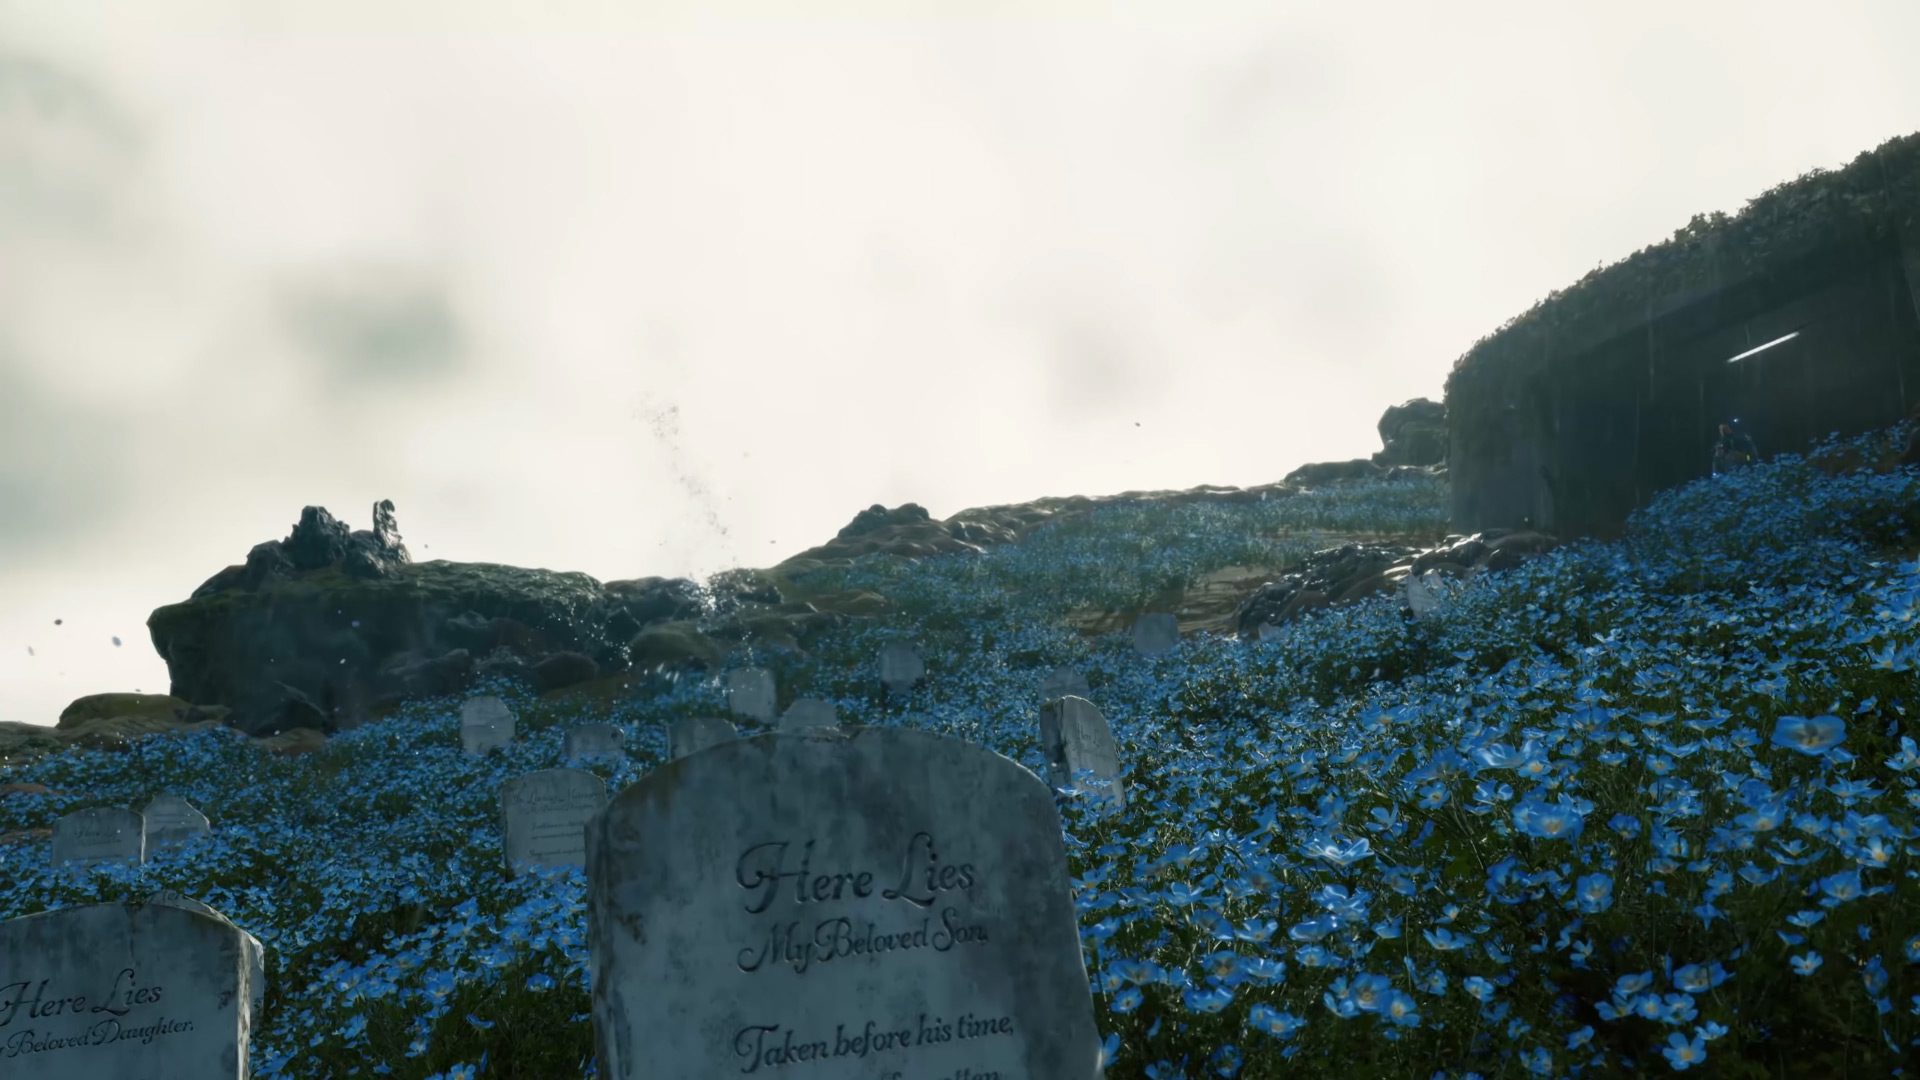 New storyline content with a grave site in Death Stranding Director's Cut